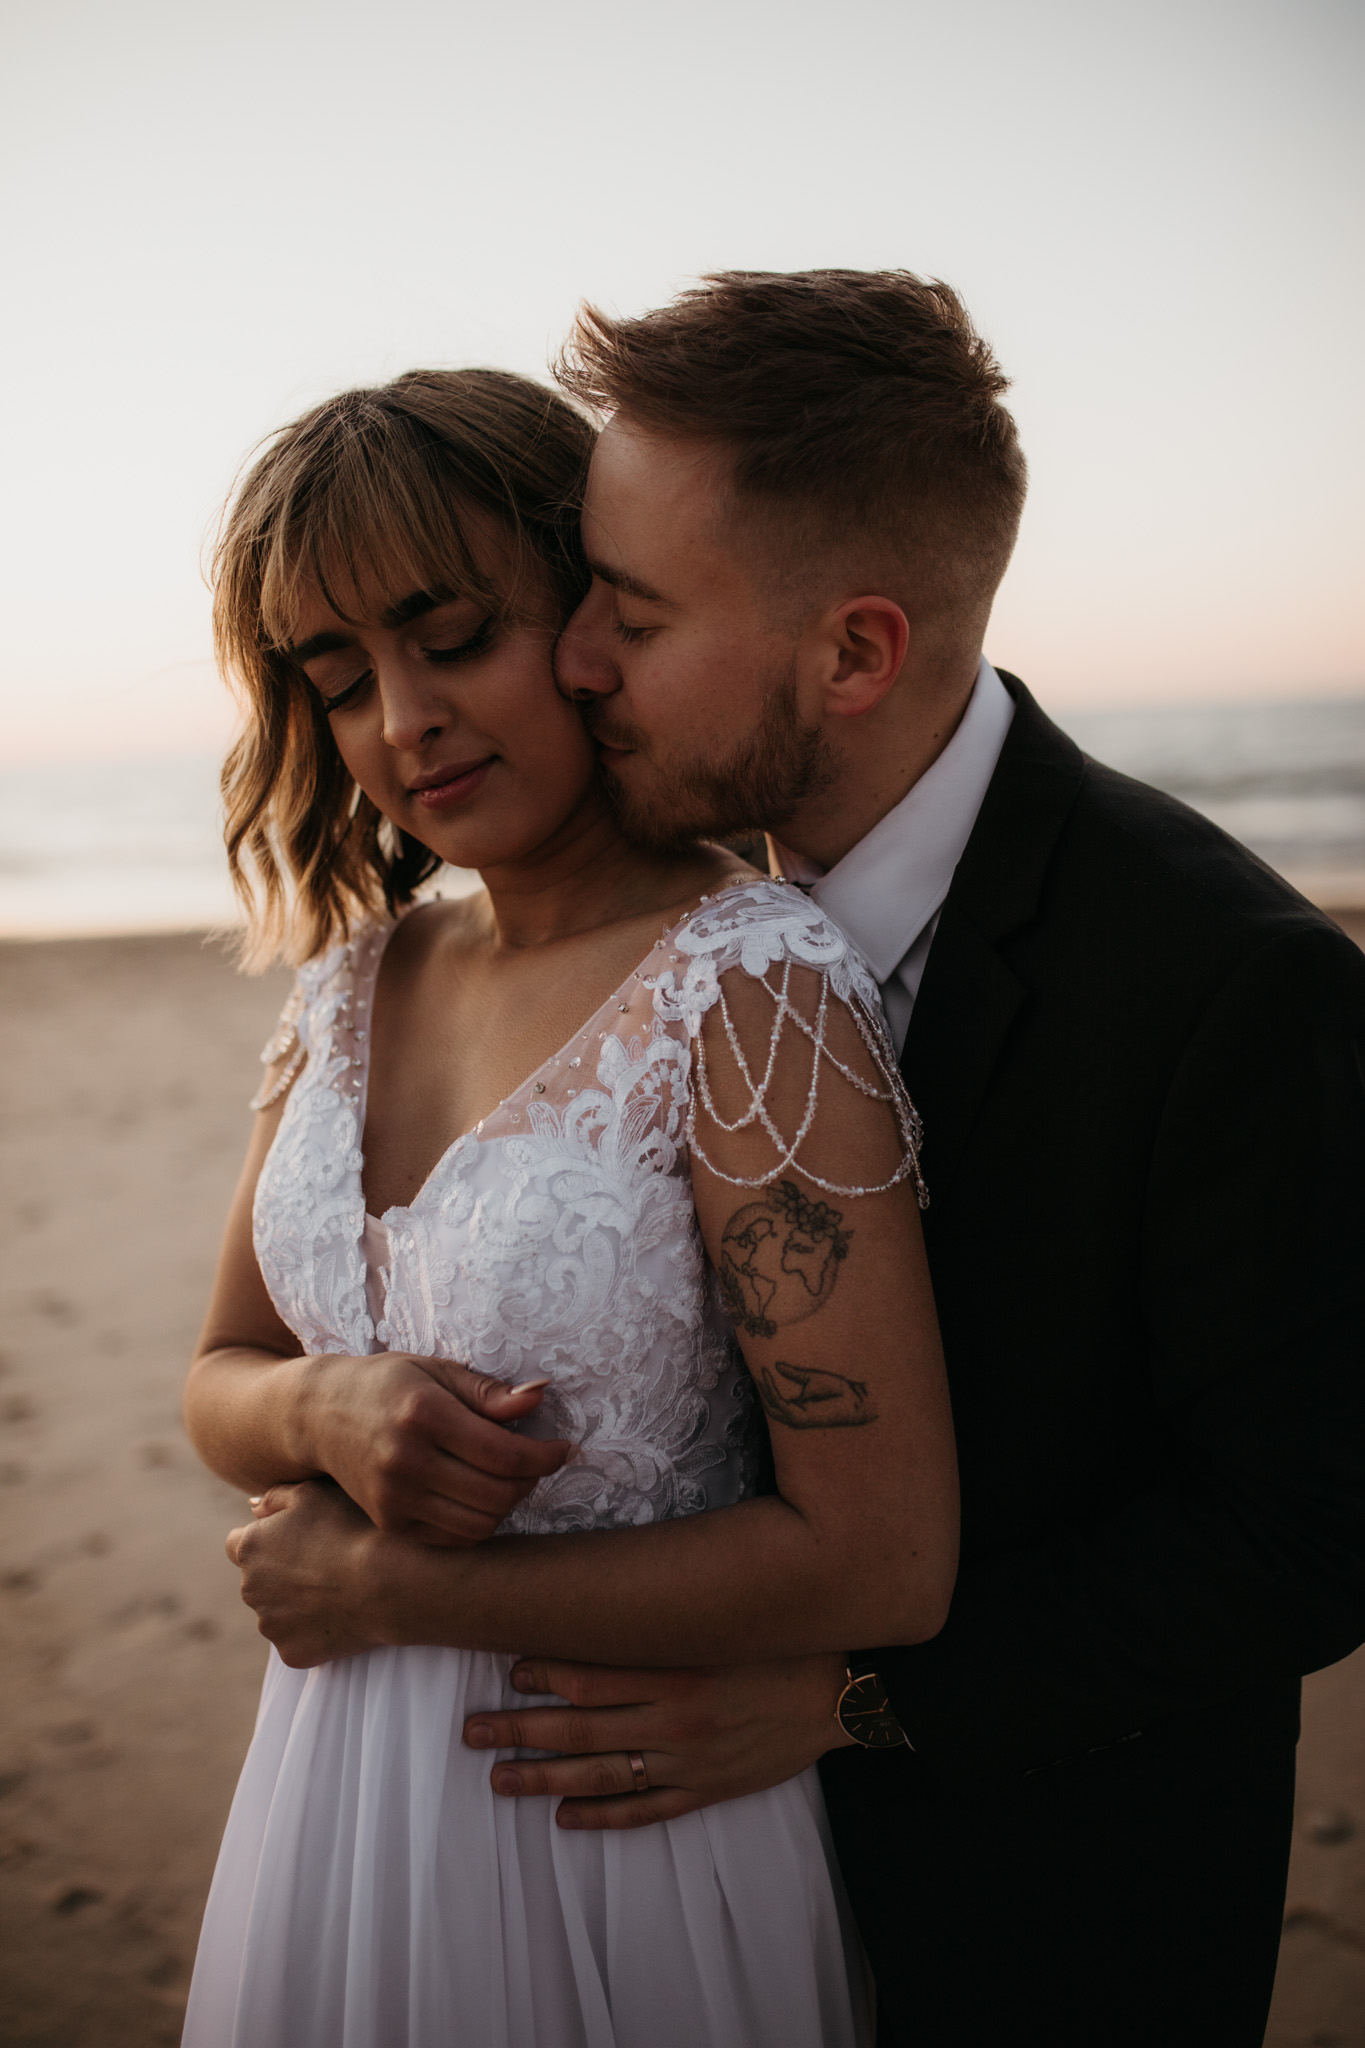 Intimate elopement portraits at twilight